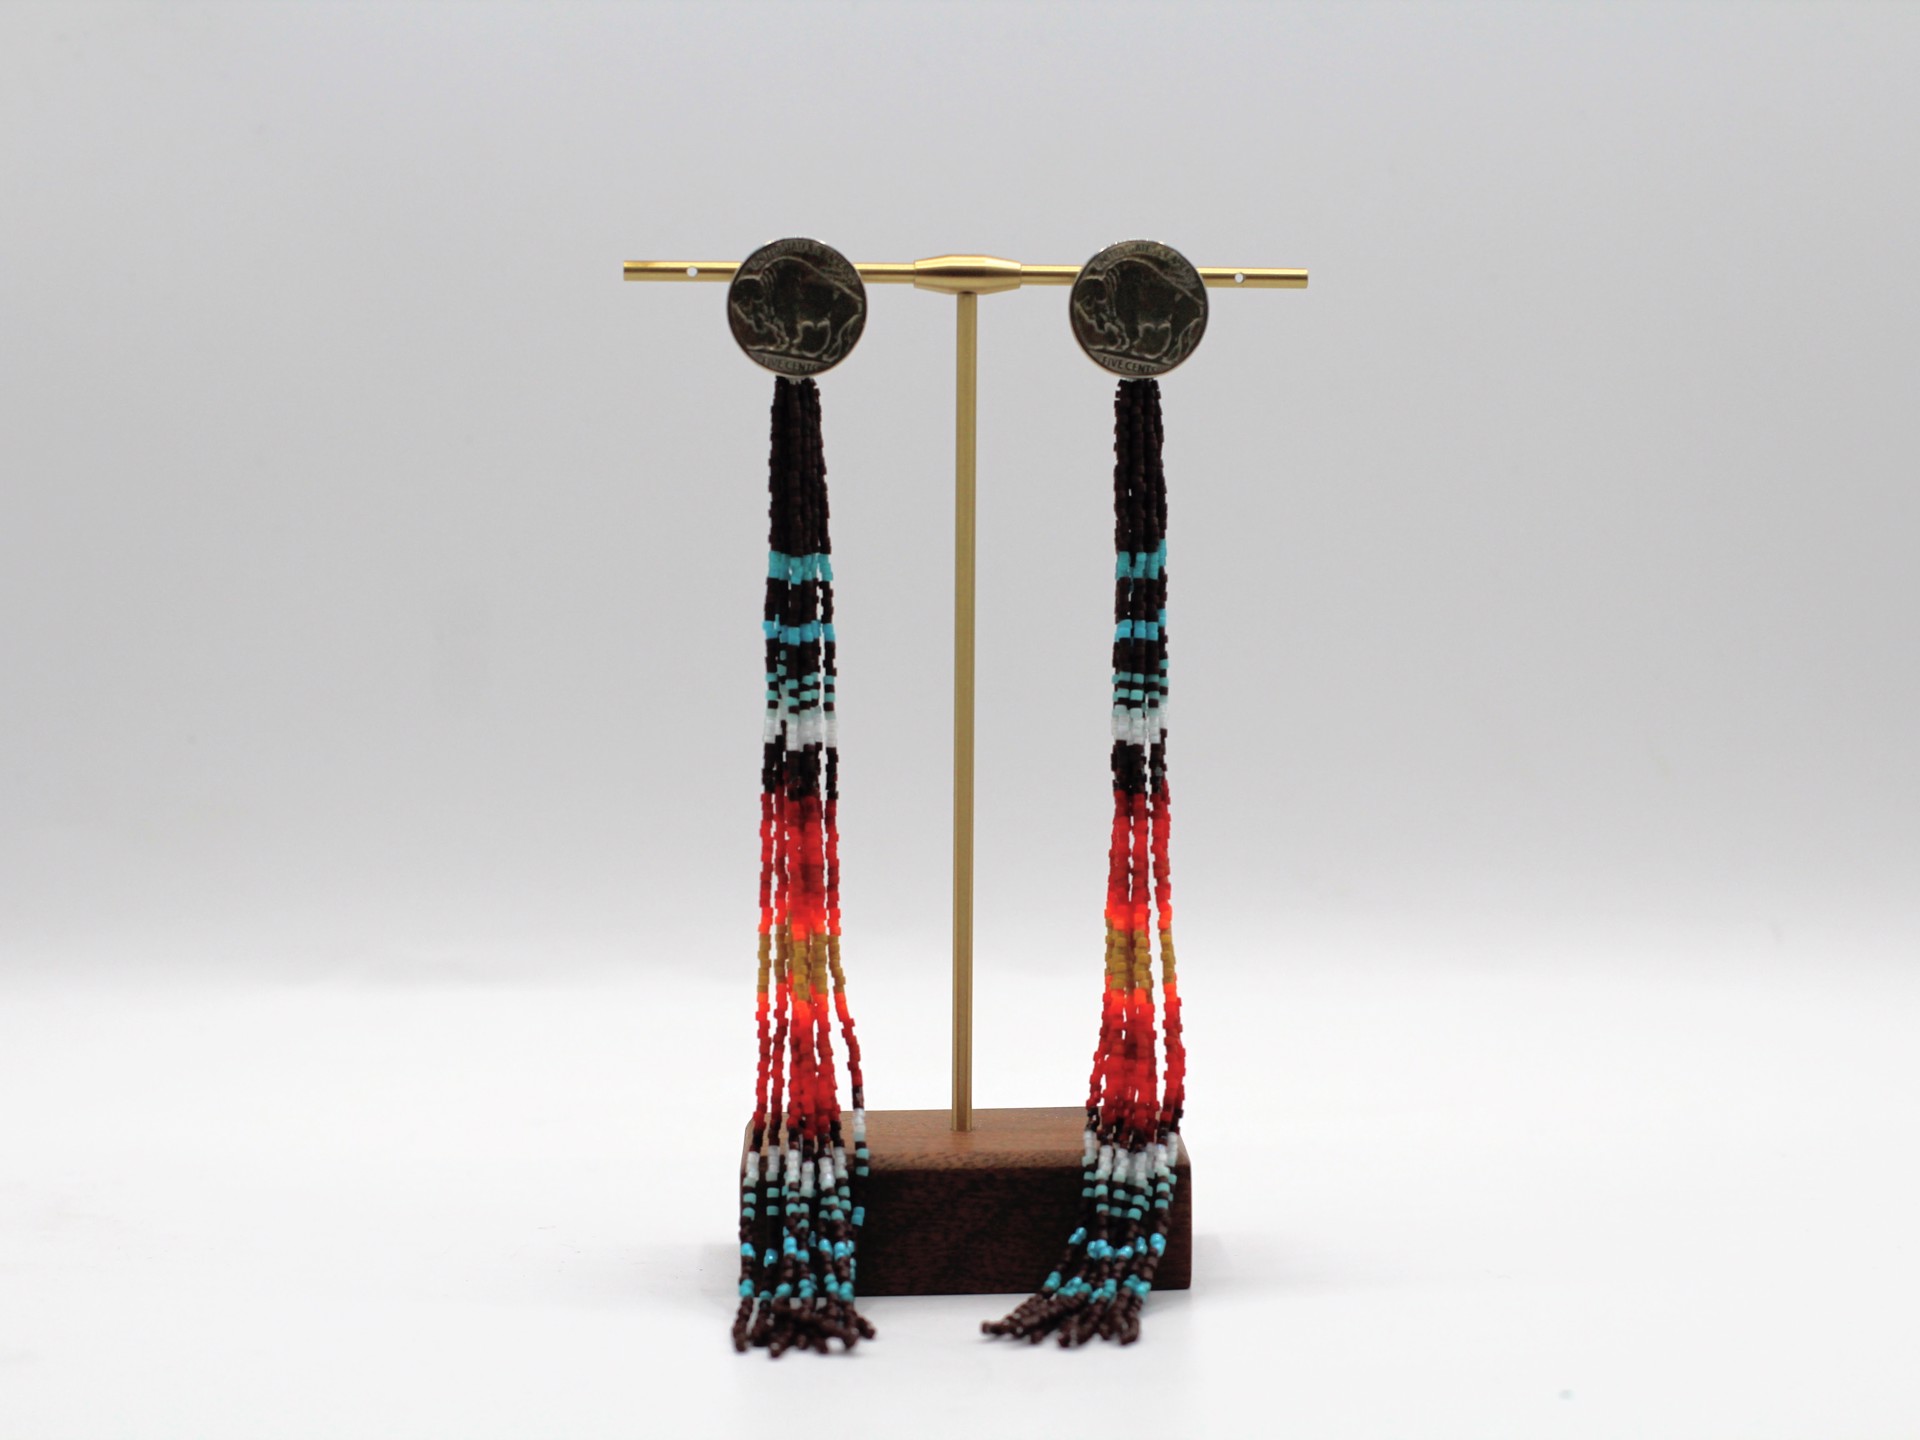 Saddle Blanket Earrings by Jessica Brewer